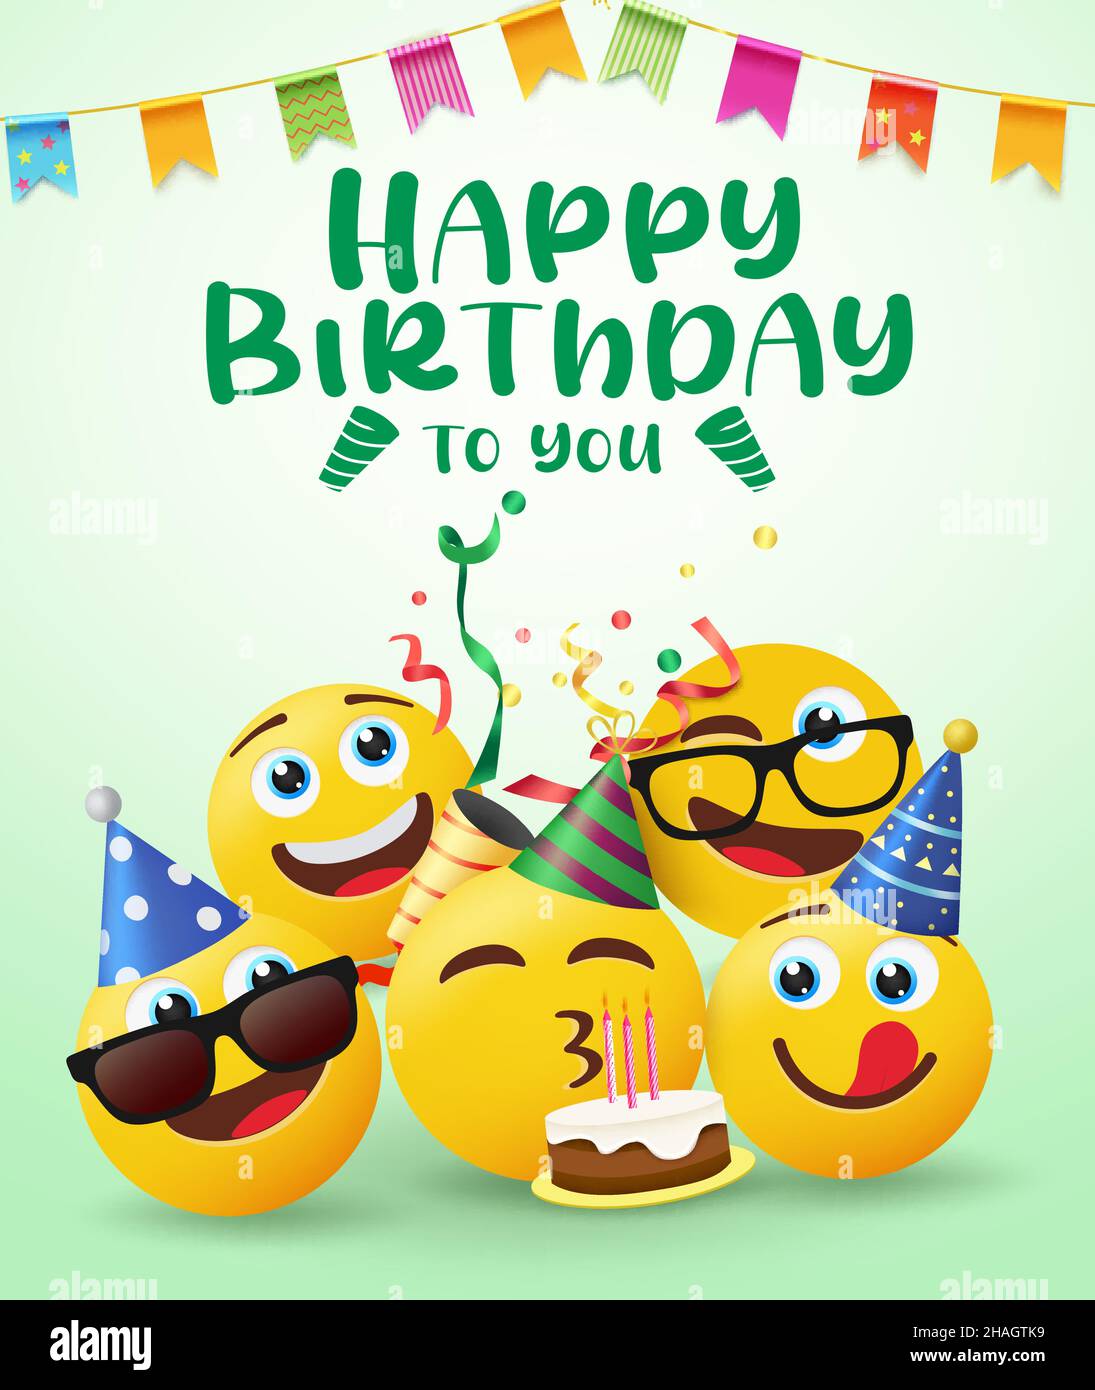 Birthday smileys vector design. Happy birthday to you text with ...